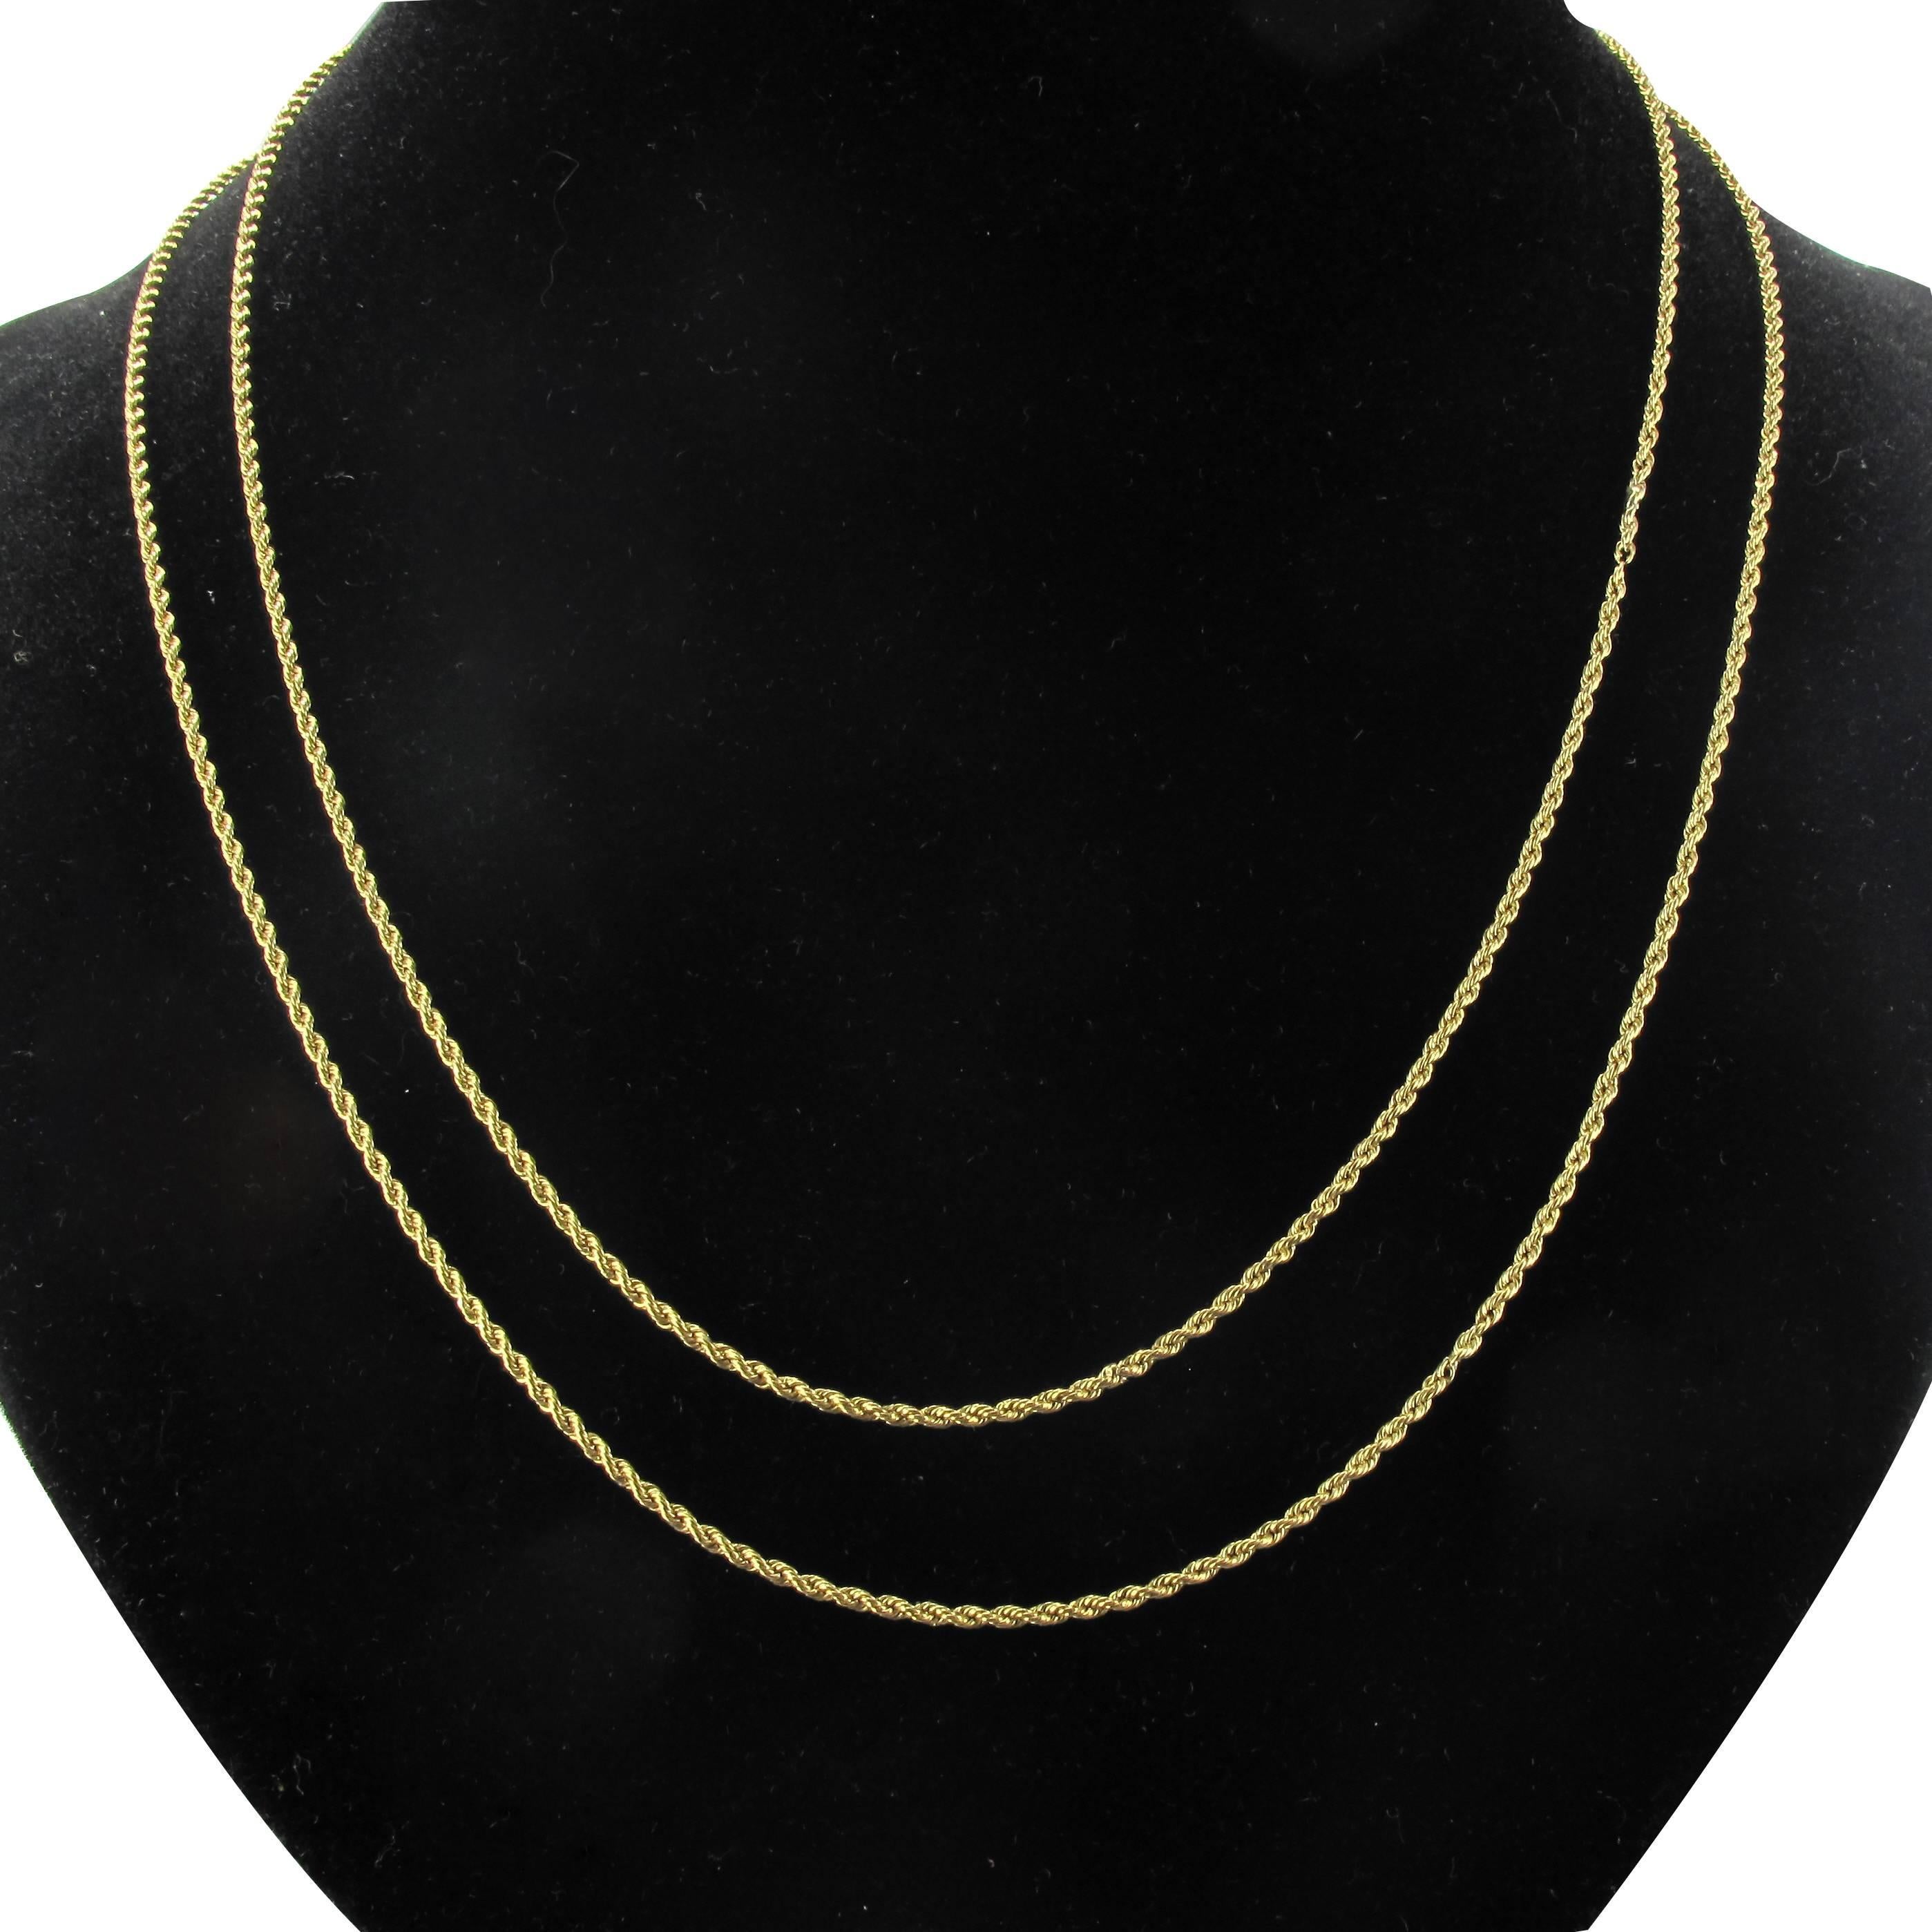 Antique 18 Karat Yellow Gold Twisted Link Matinee Long Chain Necklace 6